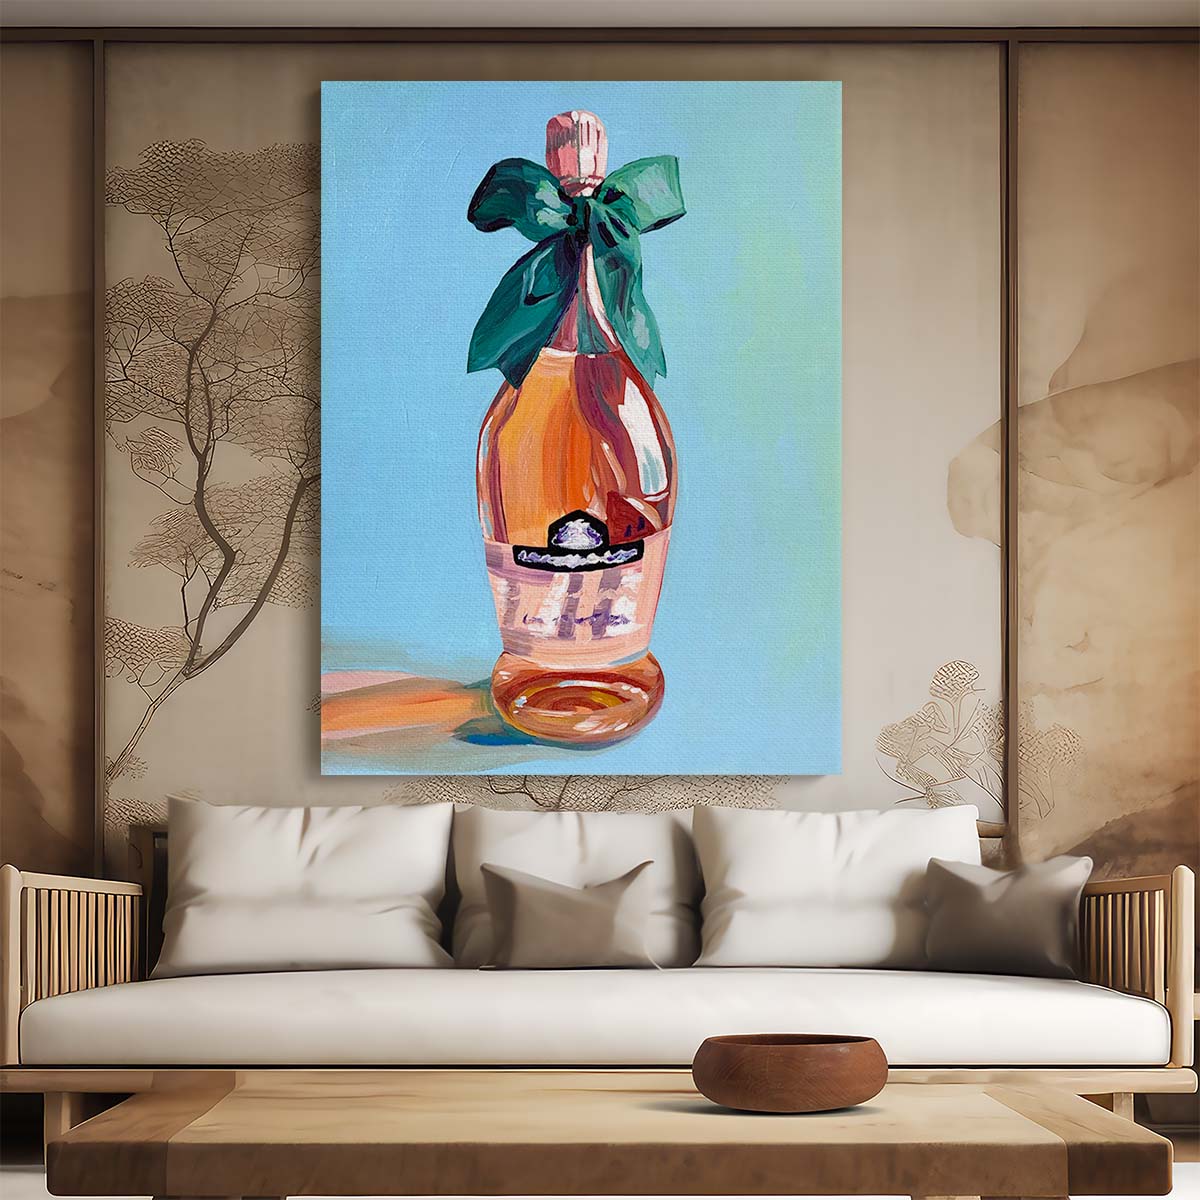 Illustrated Rose Wine Celebration Acrylic Wall Art for Housewarming by Luxuriance Designs, made in USA